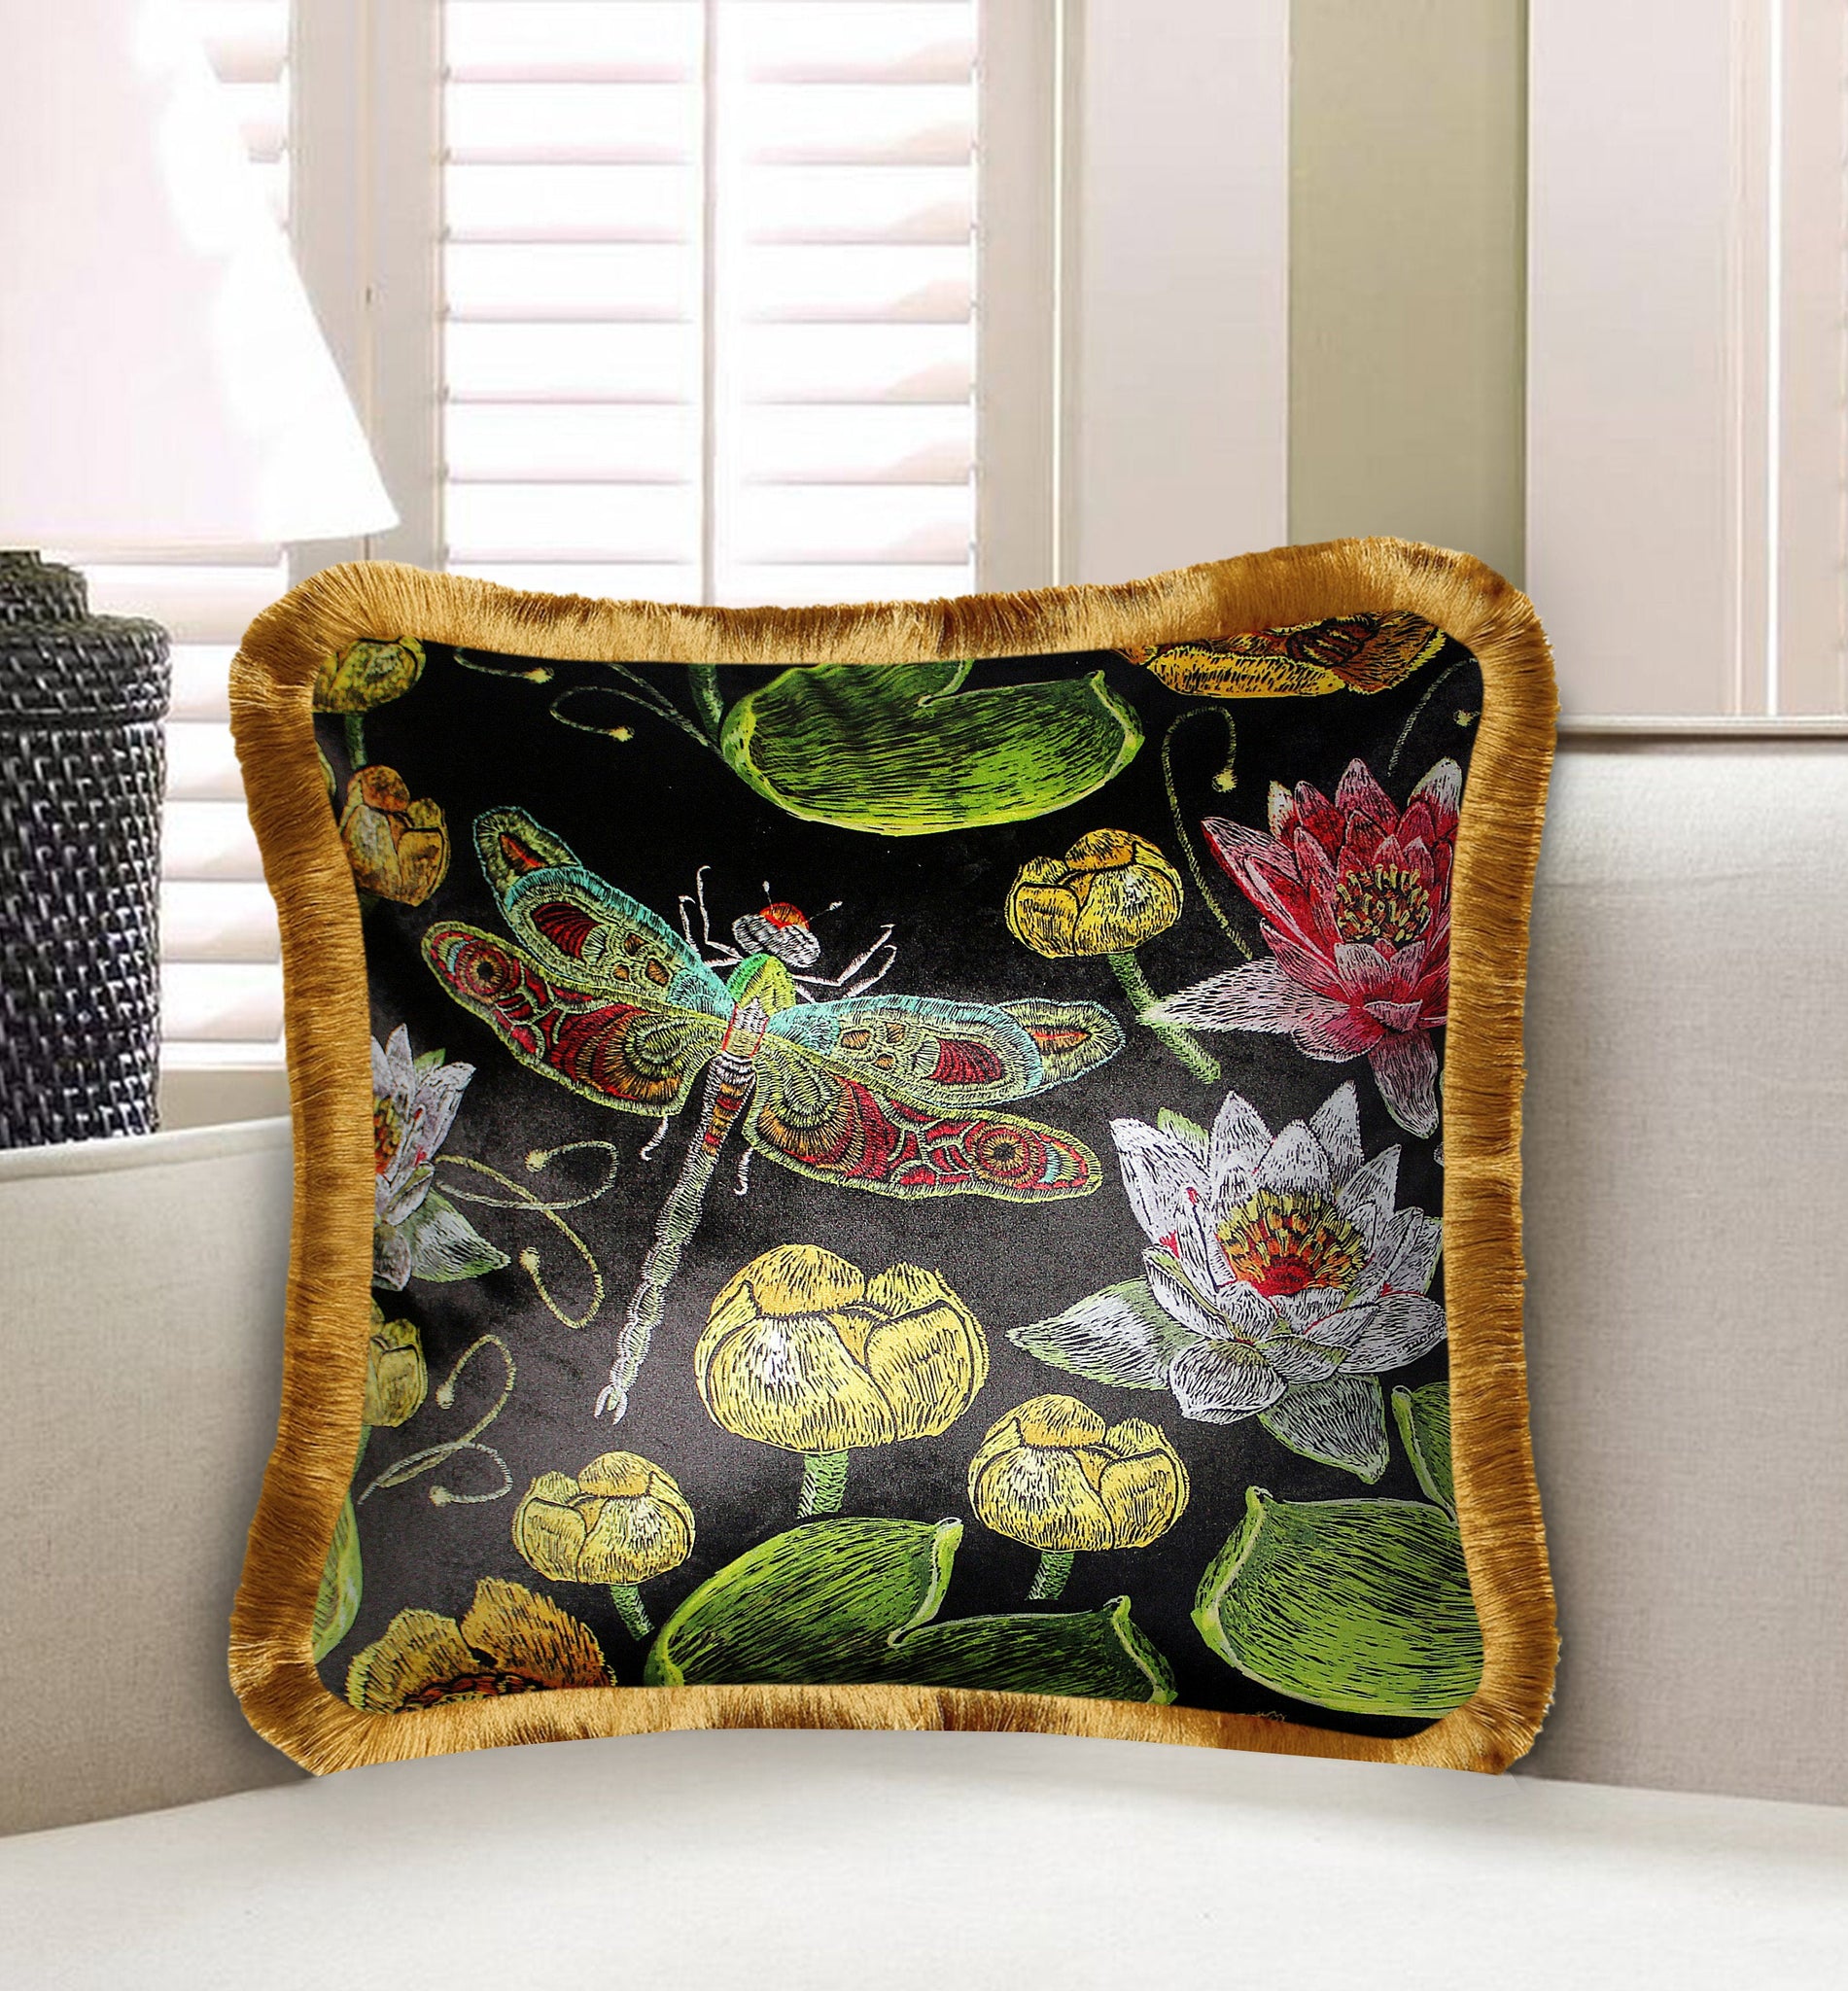  Velvet Cushion Cover Embroidery Imitated Lotus and Dragonfly Decorative pillowcase, Vivid Flower and Insect Décor Throw Pillow for Sofa Chair Bedroom Living Room Multi Color 45x45cm (18x18 Inches)